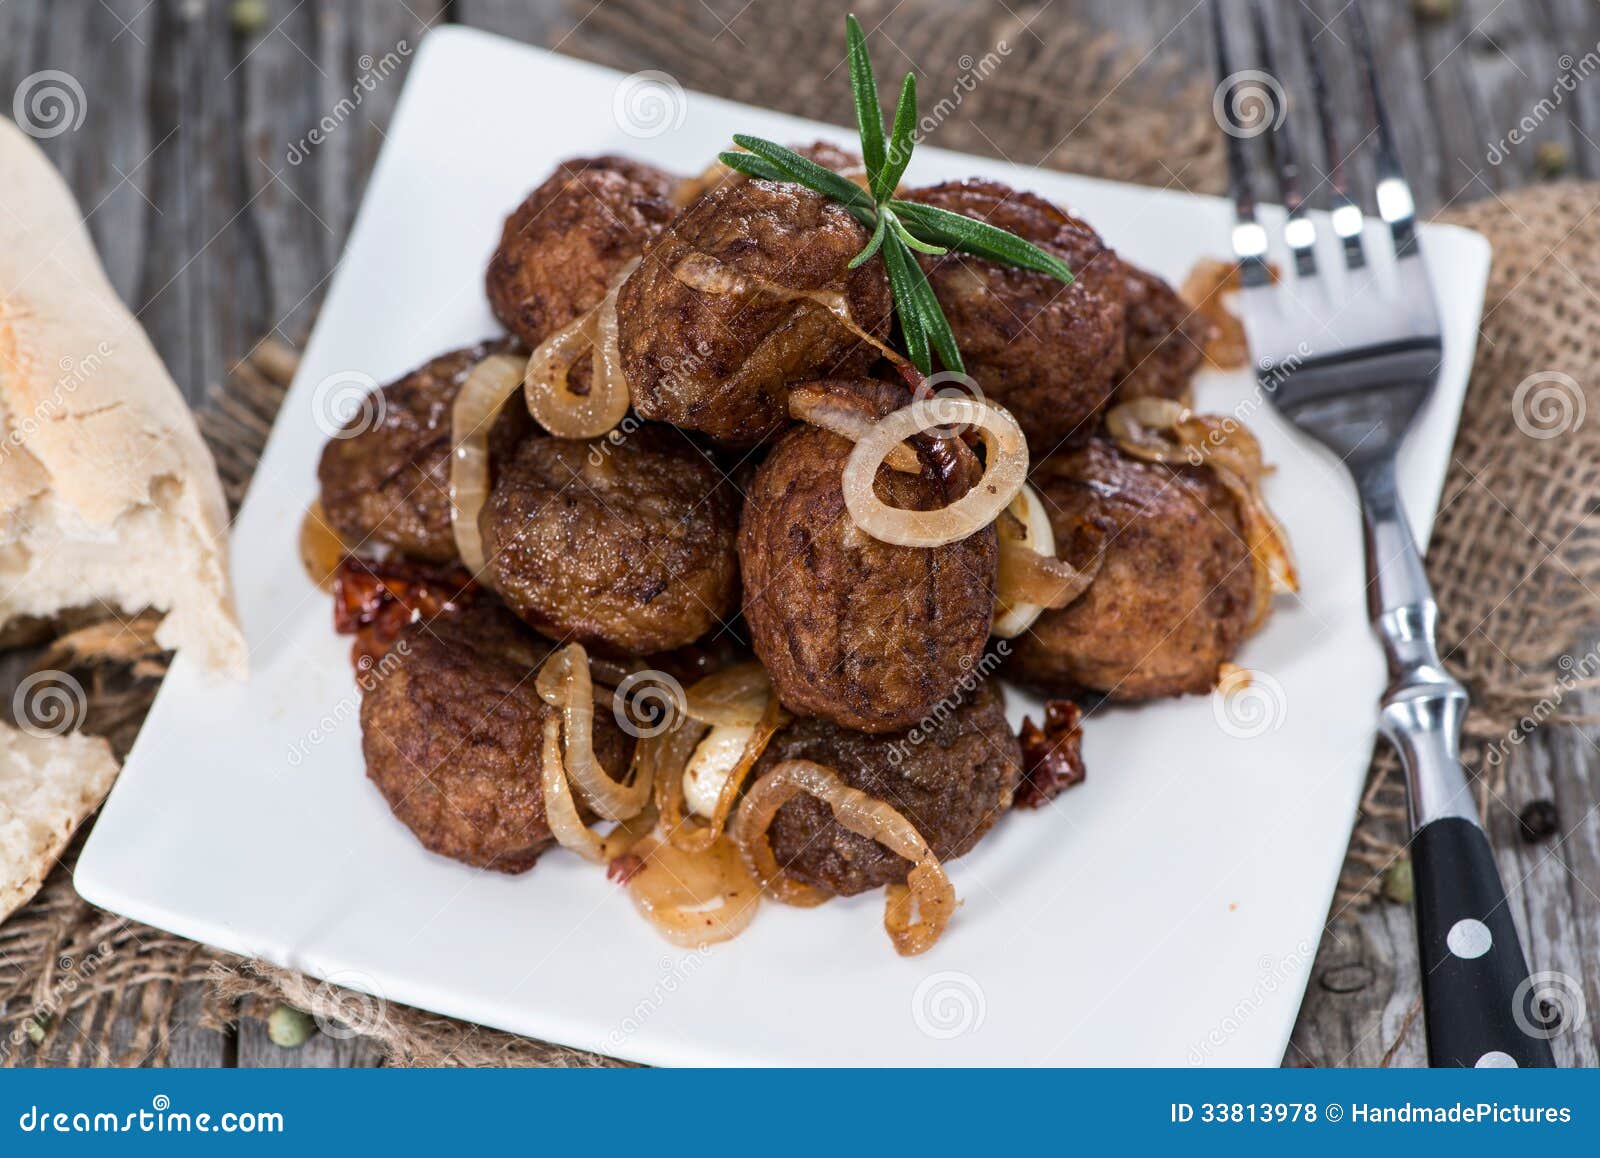 Plate with Fresh Made Meatballs Stock Photo - Image of detail ...